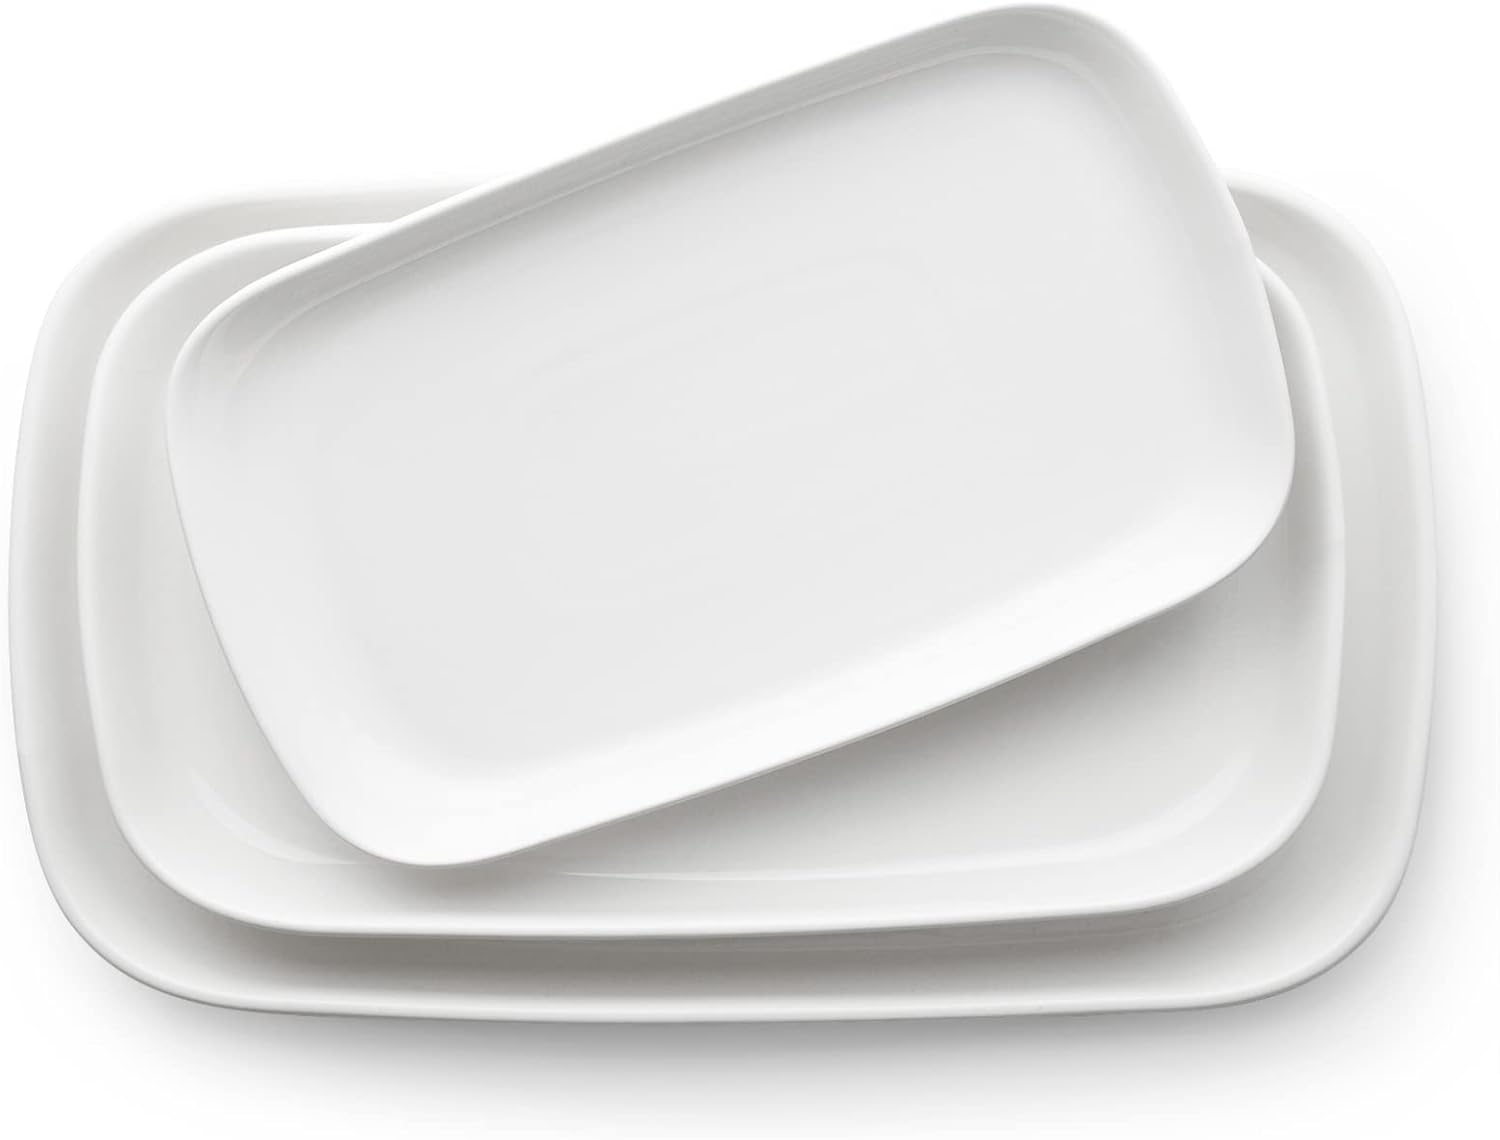 Serving Platter Review: A Must-Have Addition for Elegant Dining